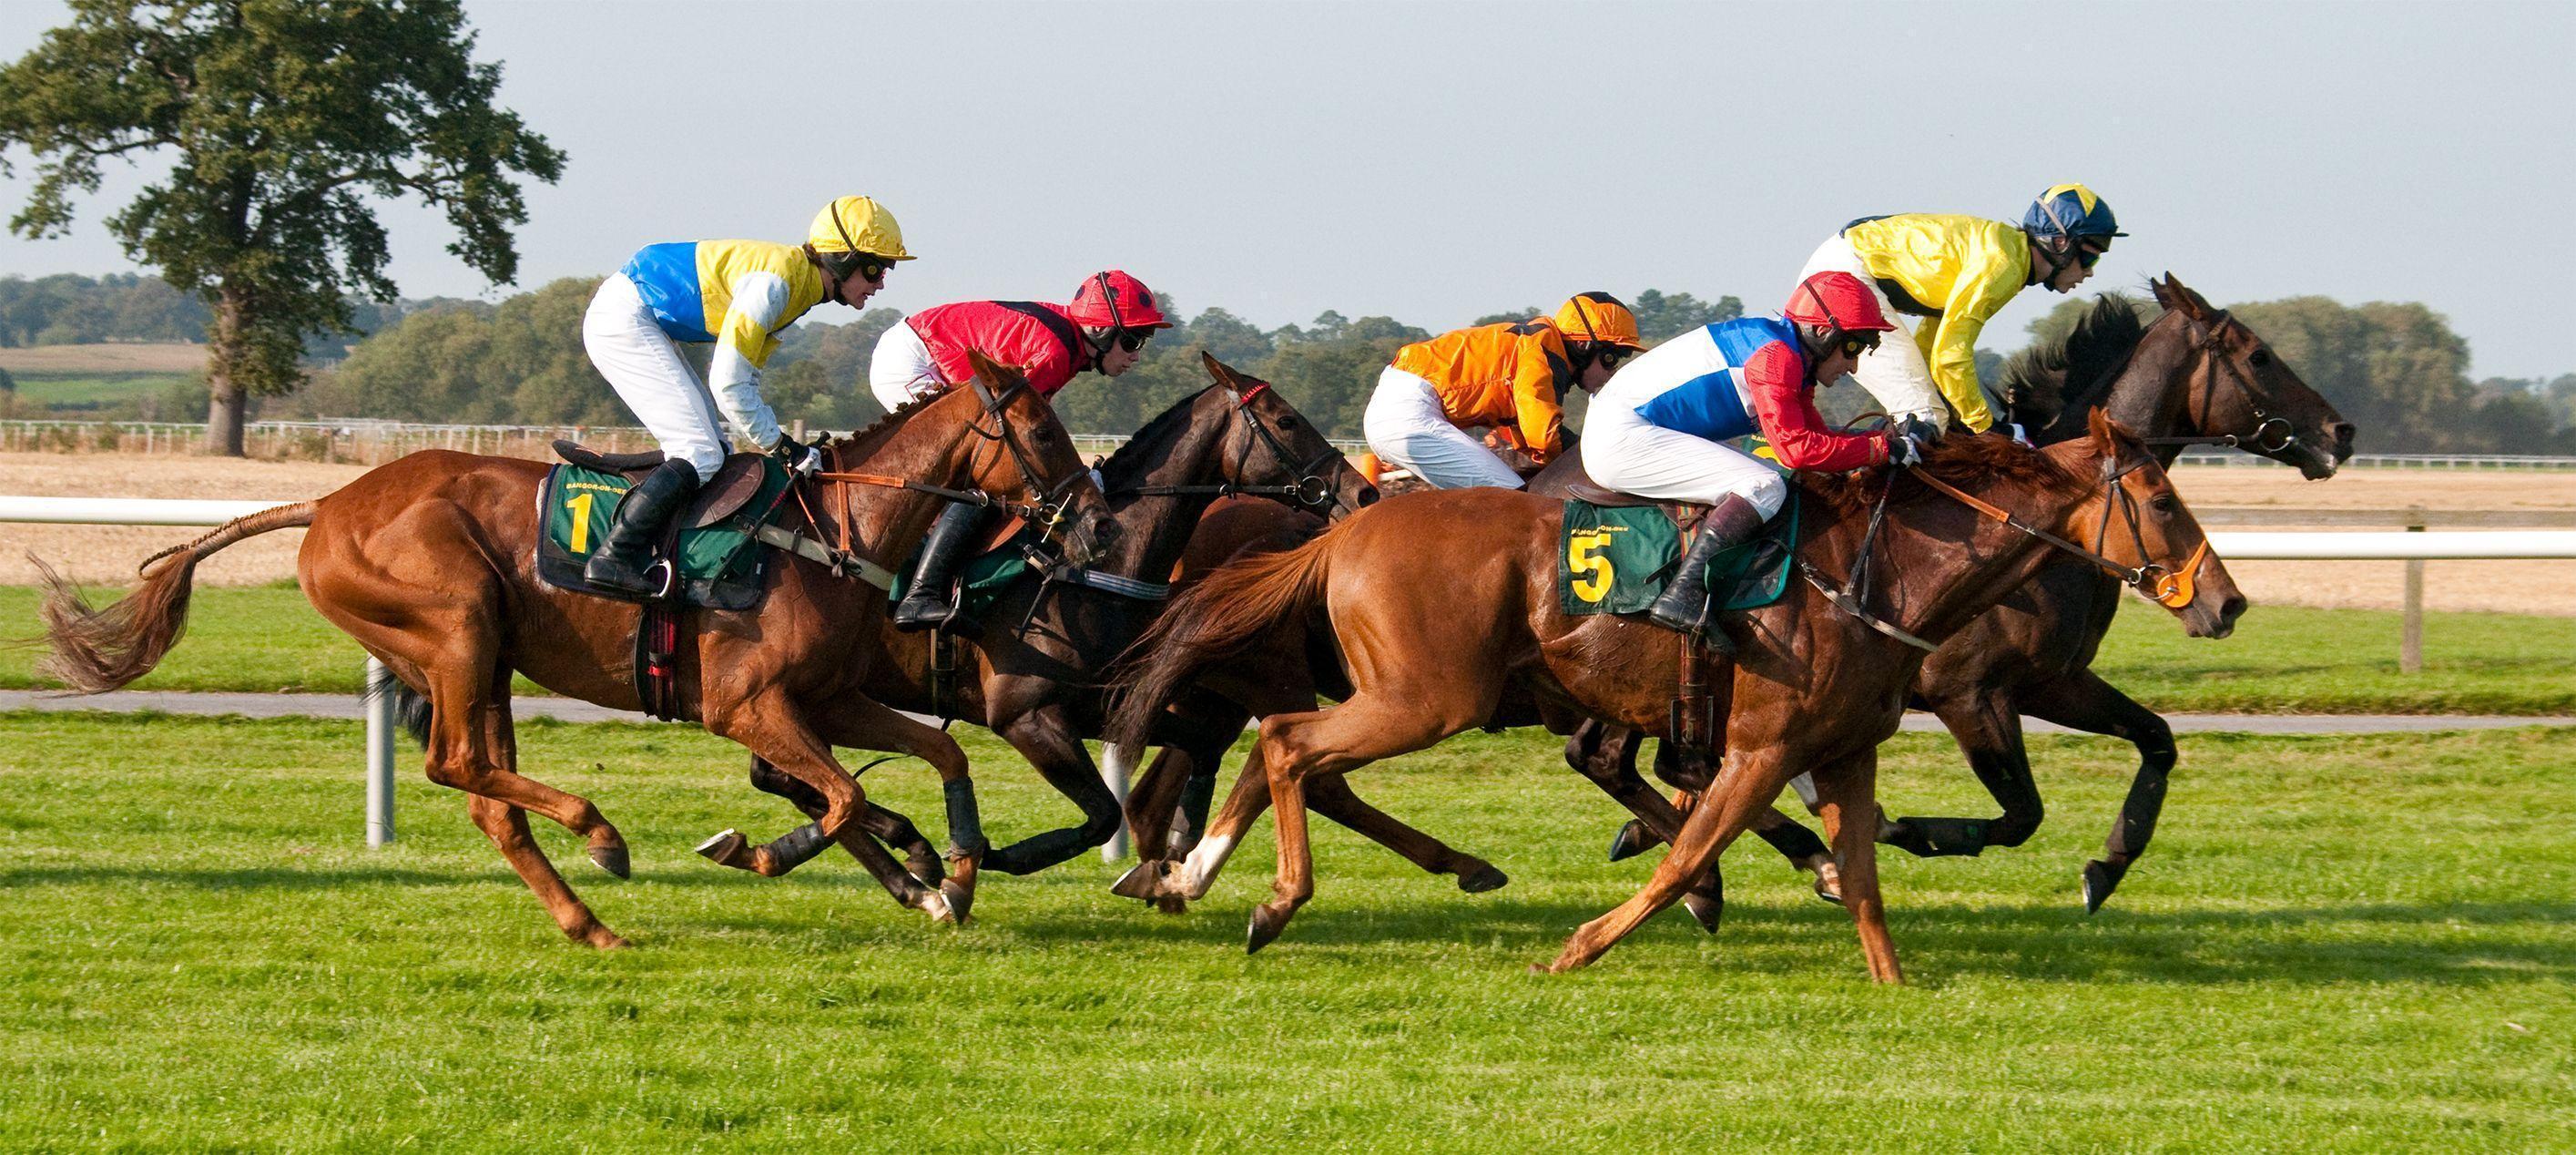 High Quality Horse Racing Wallpaper. Full HD Picture